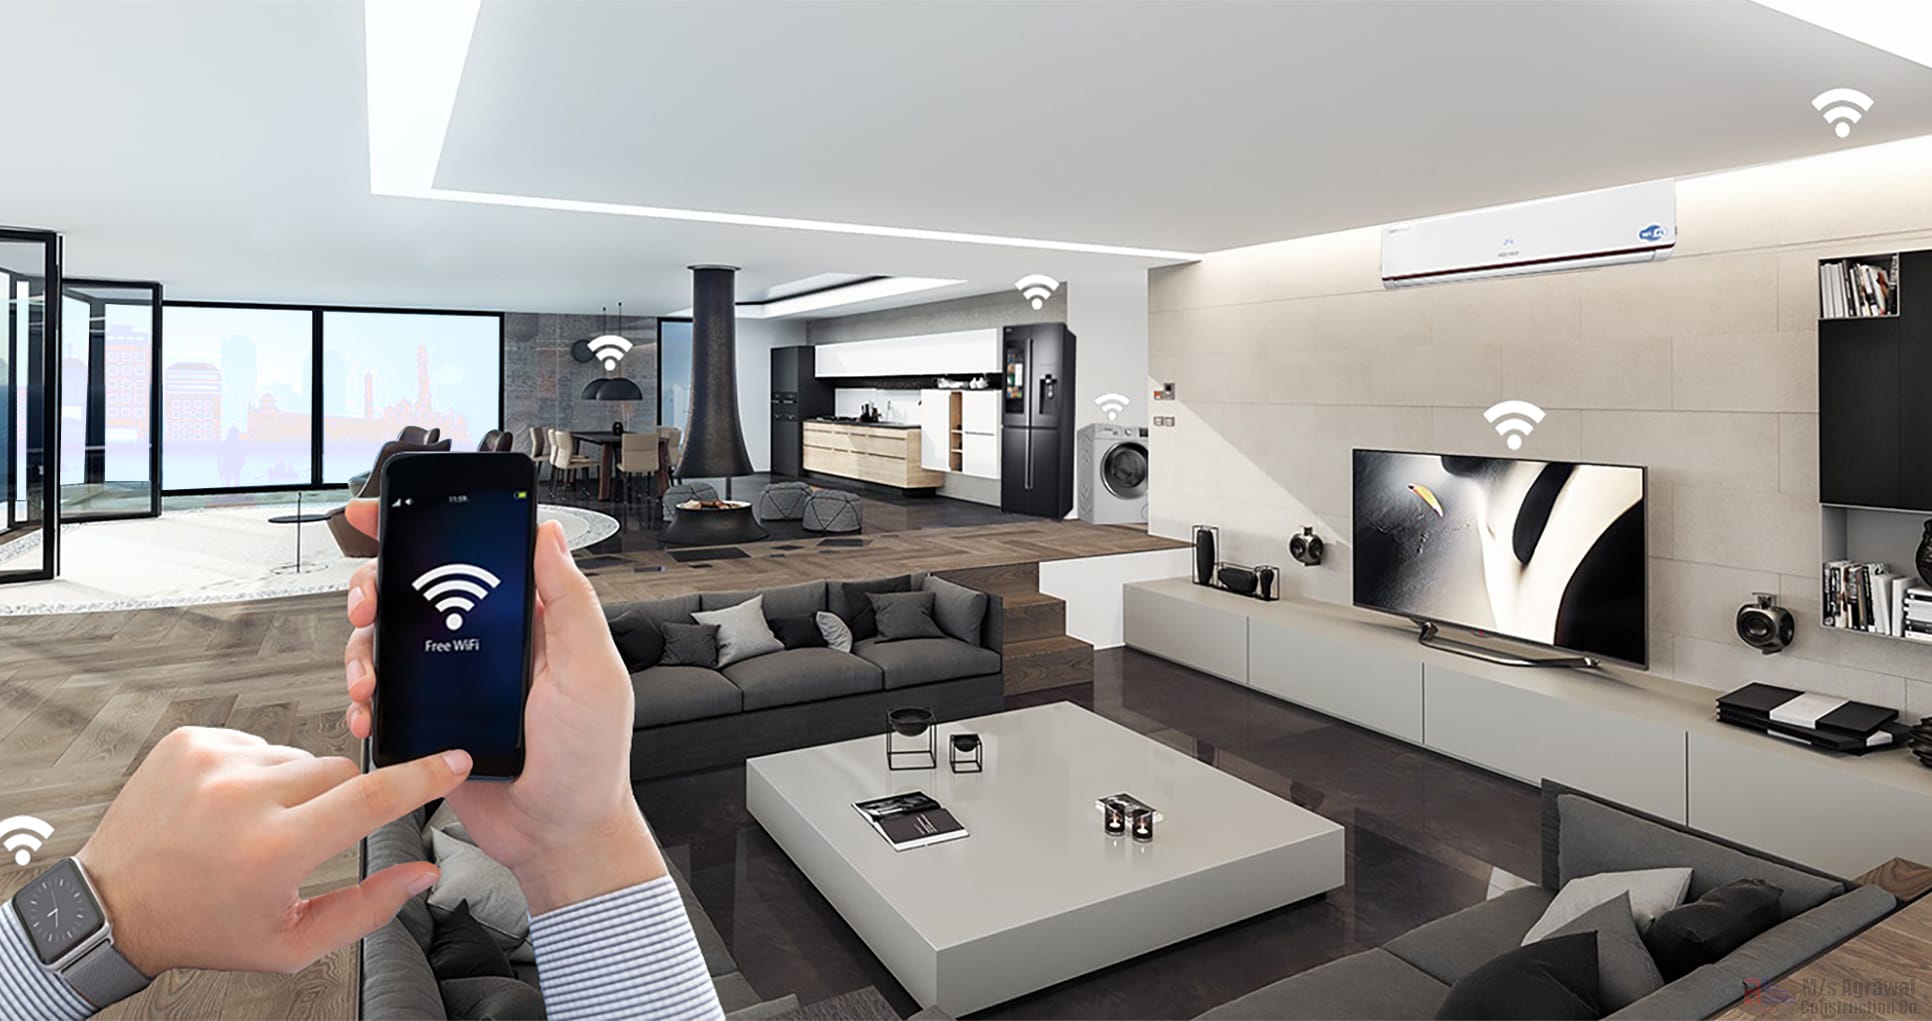 Real Estate With Smart Living Powered By Smart Technology